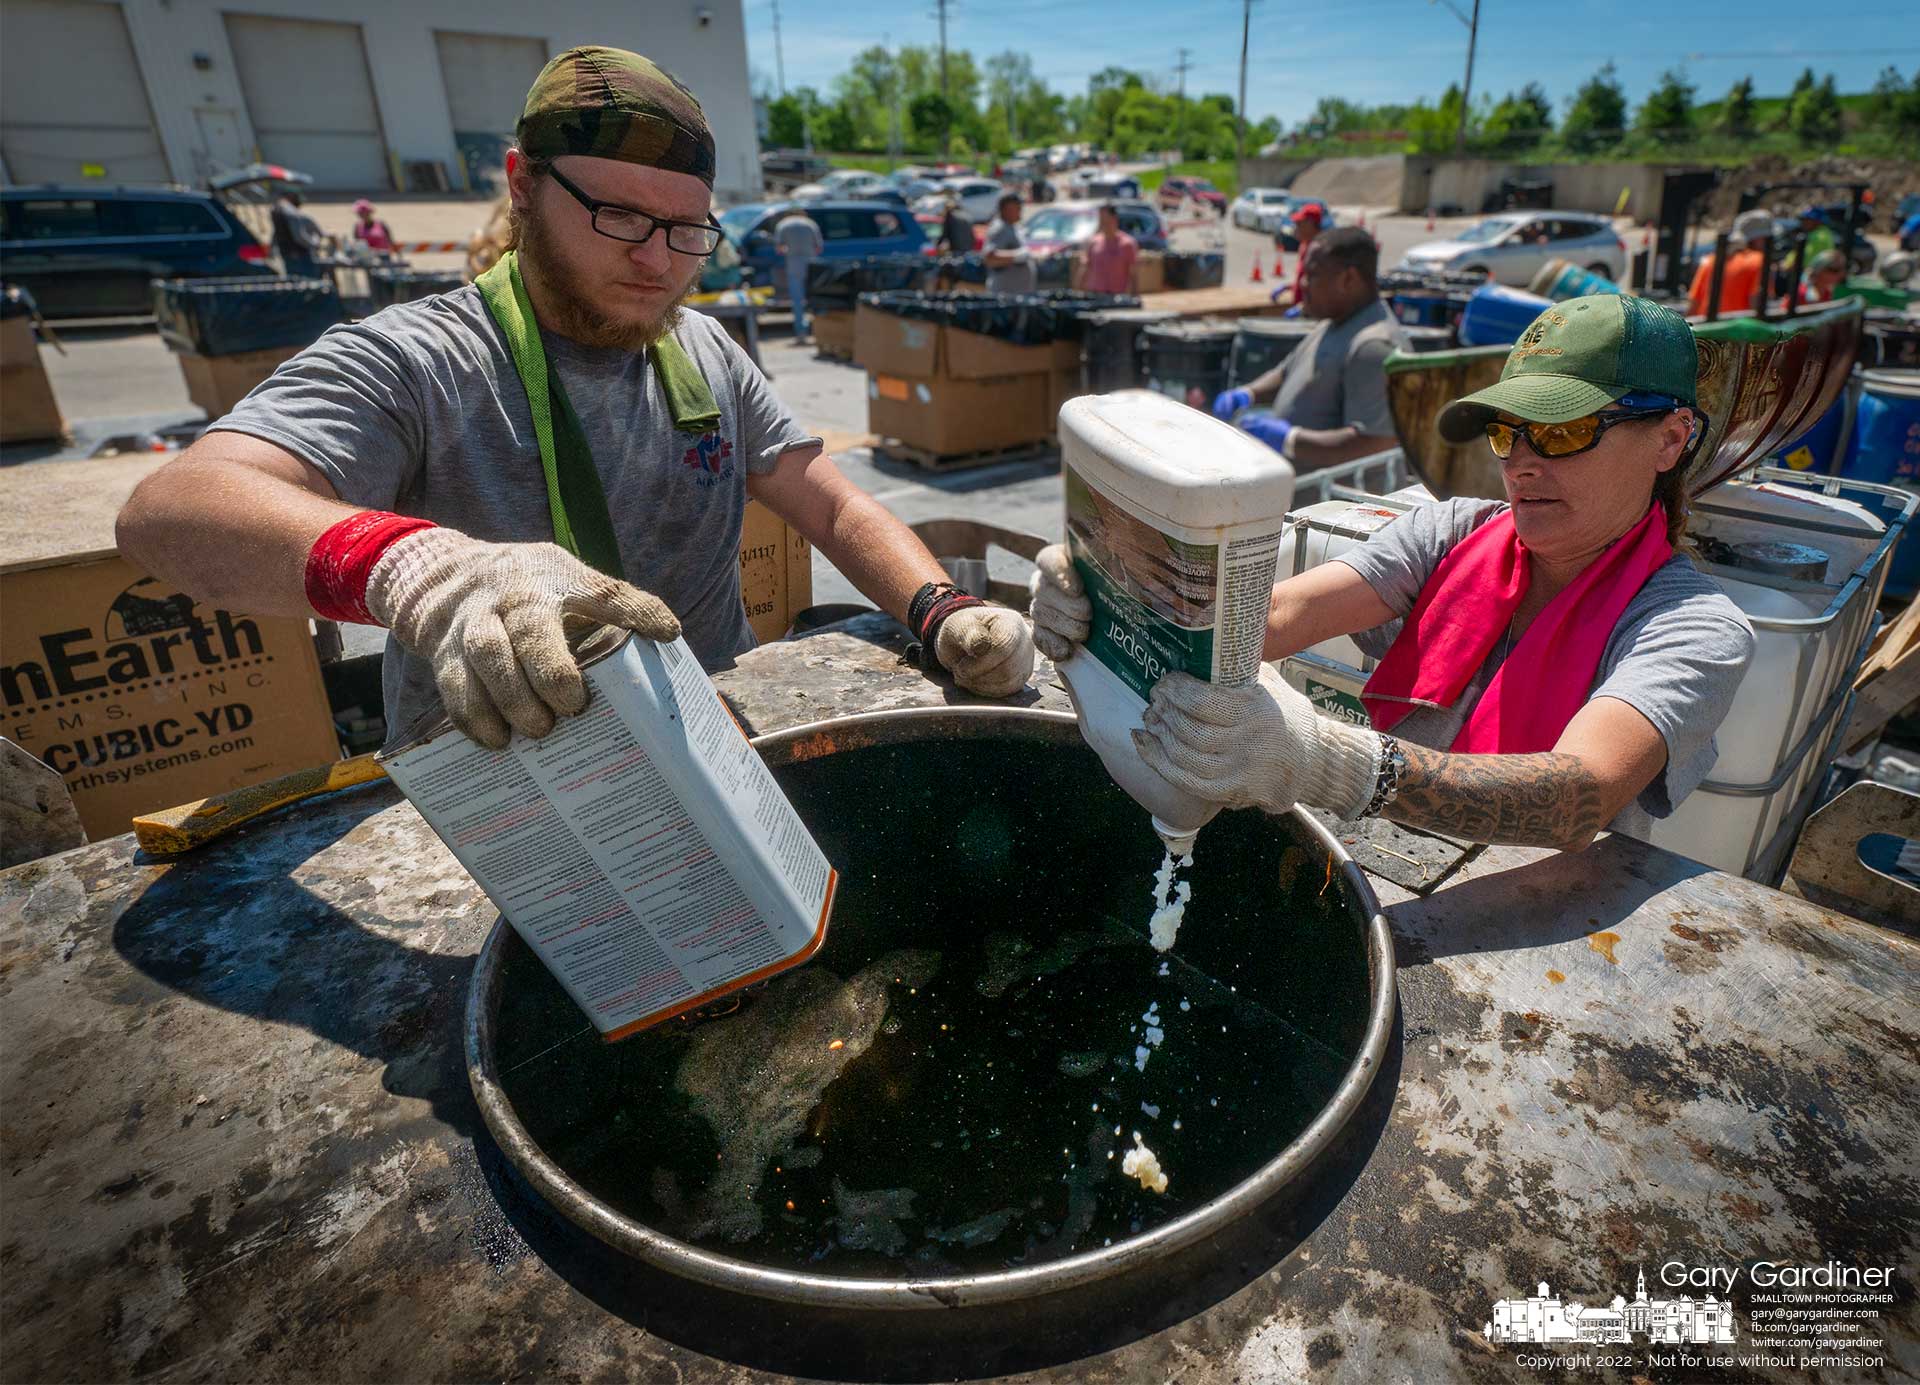 Containers of volatile petroleum products are poured into a holding tank for disposal as part of the collection of household hazardous waste at the city garage Saturday. My Final Photo for May 14, 2022.